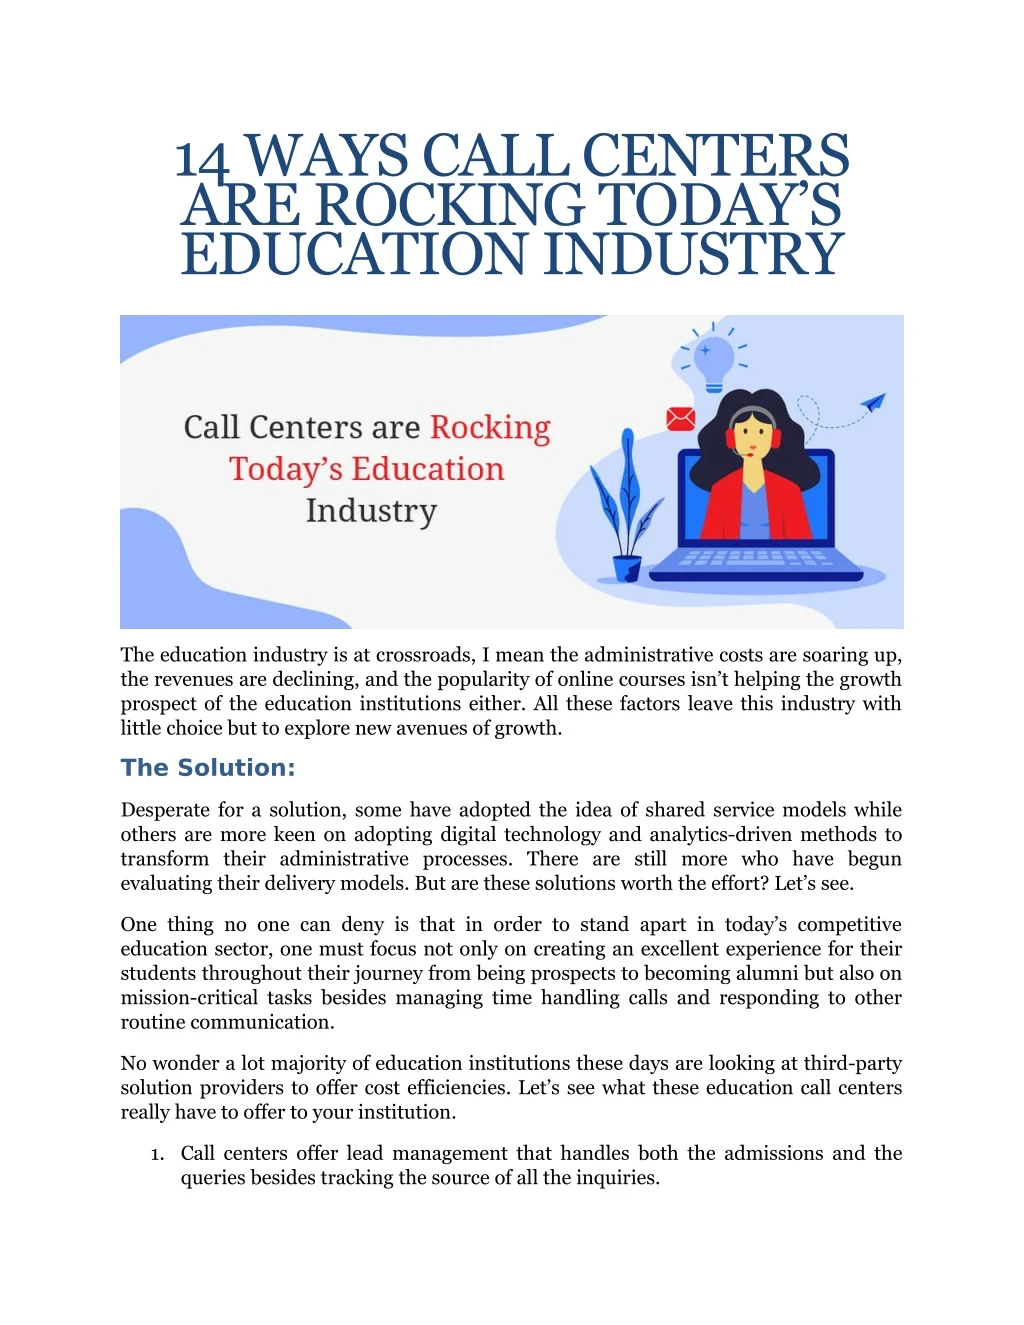 14 ways call centers are rocking today